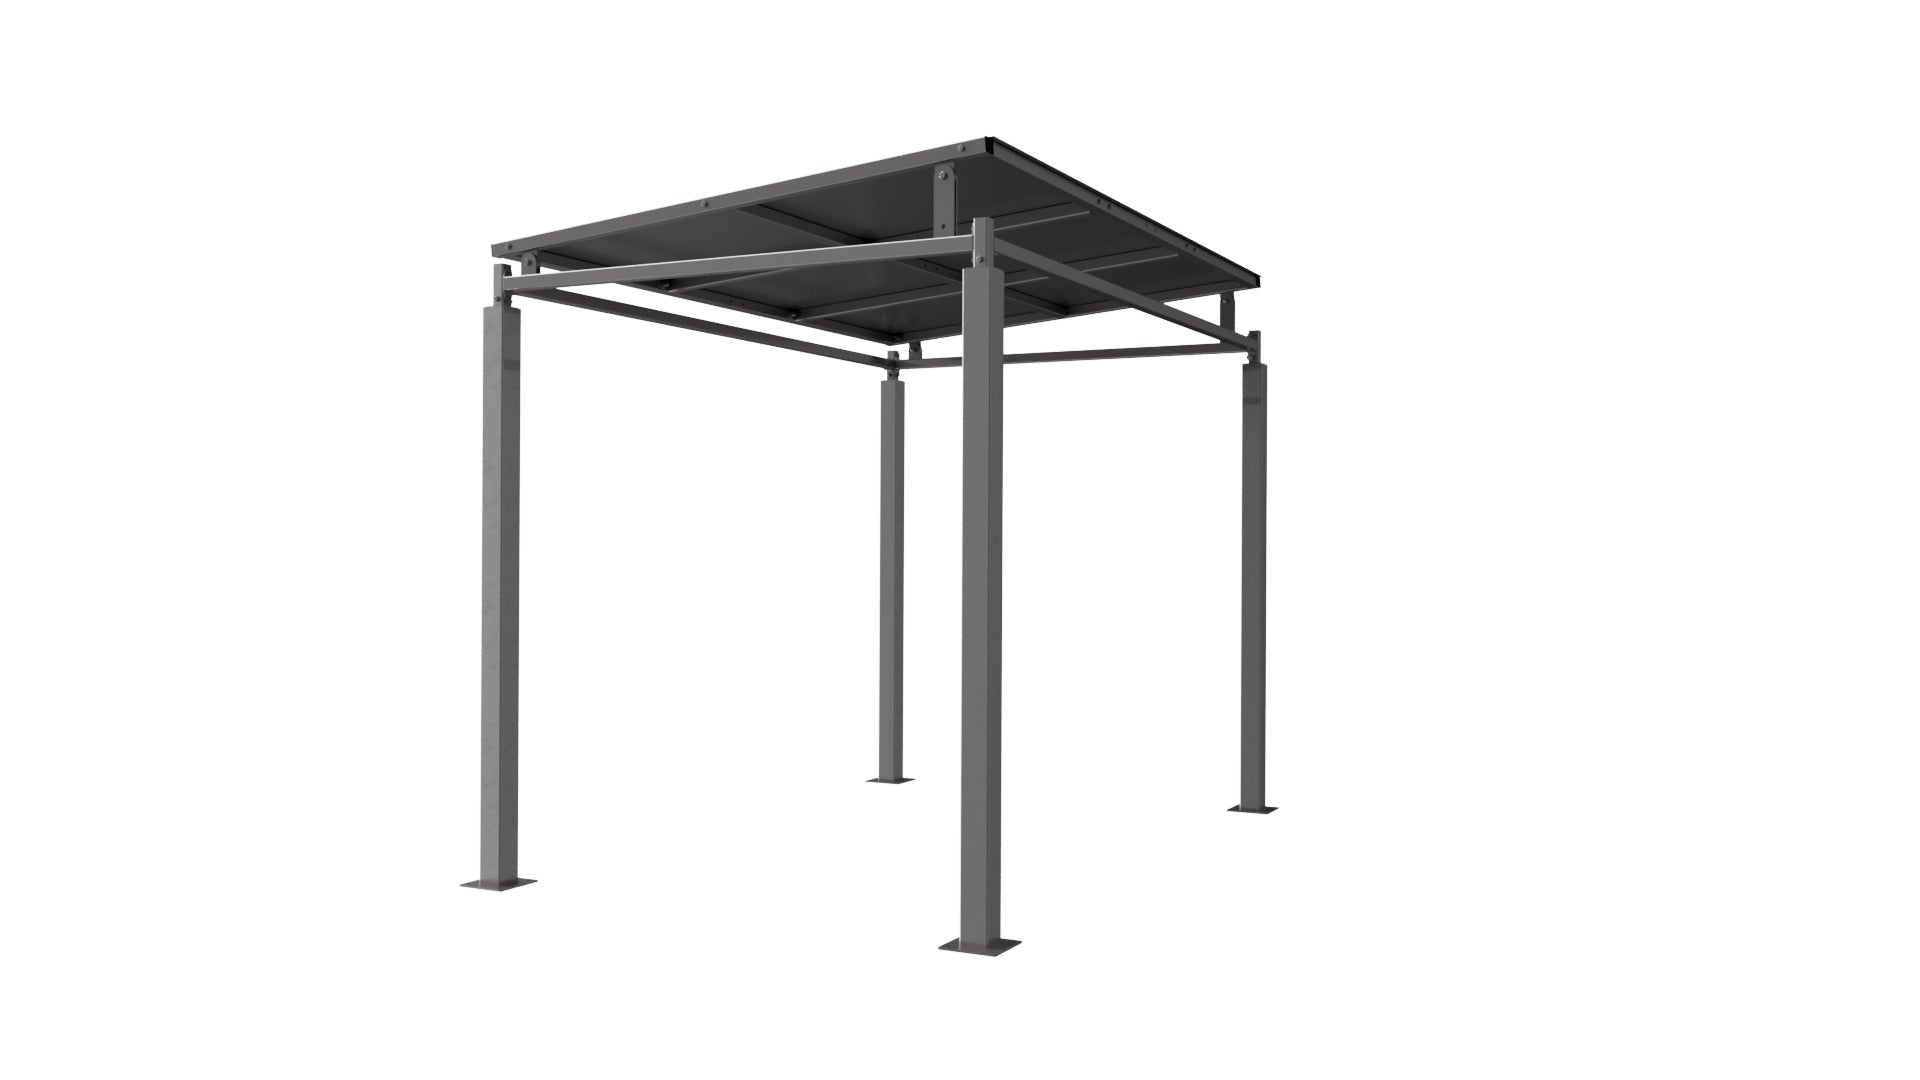 Bedford Cycle / Smoking Shelter Galvanised Steel Frame Open Sided